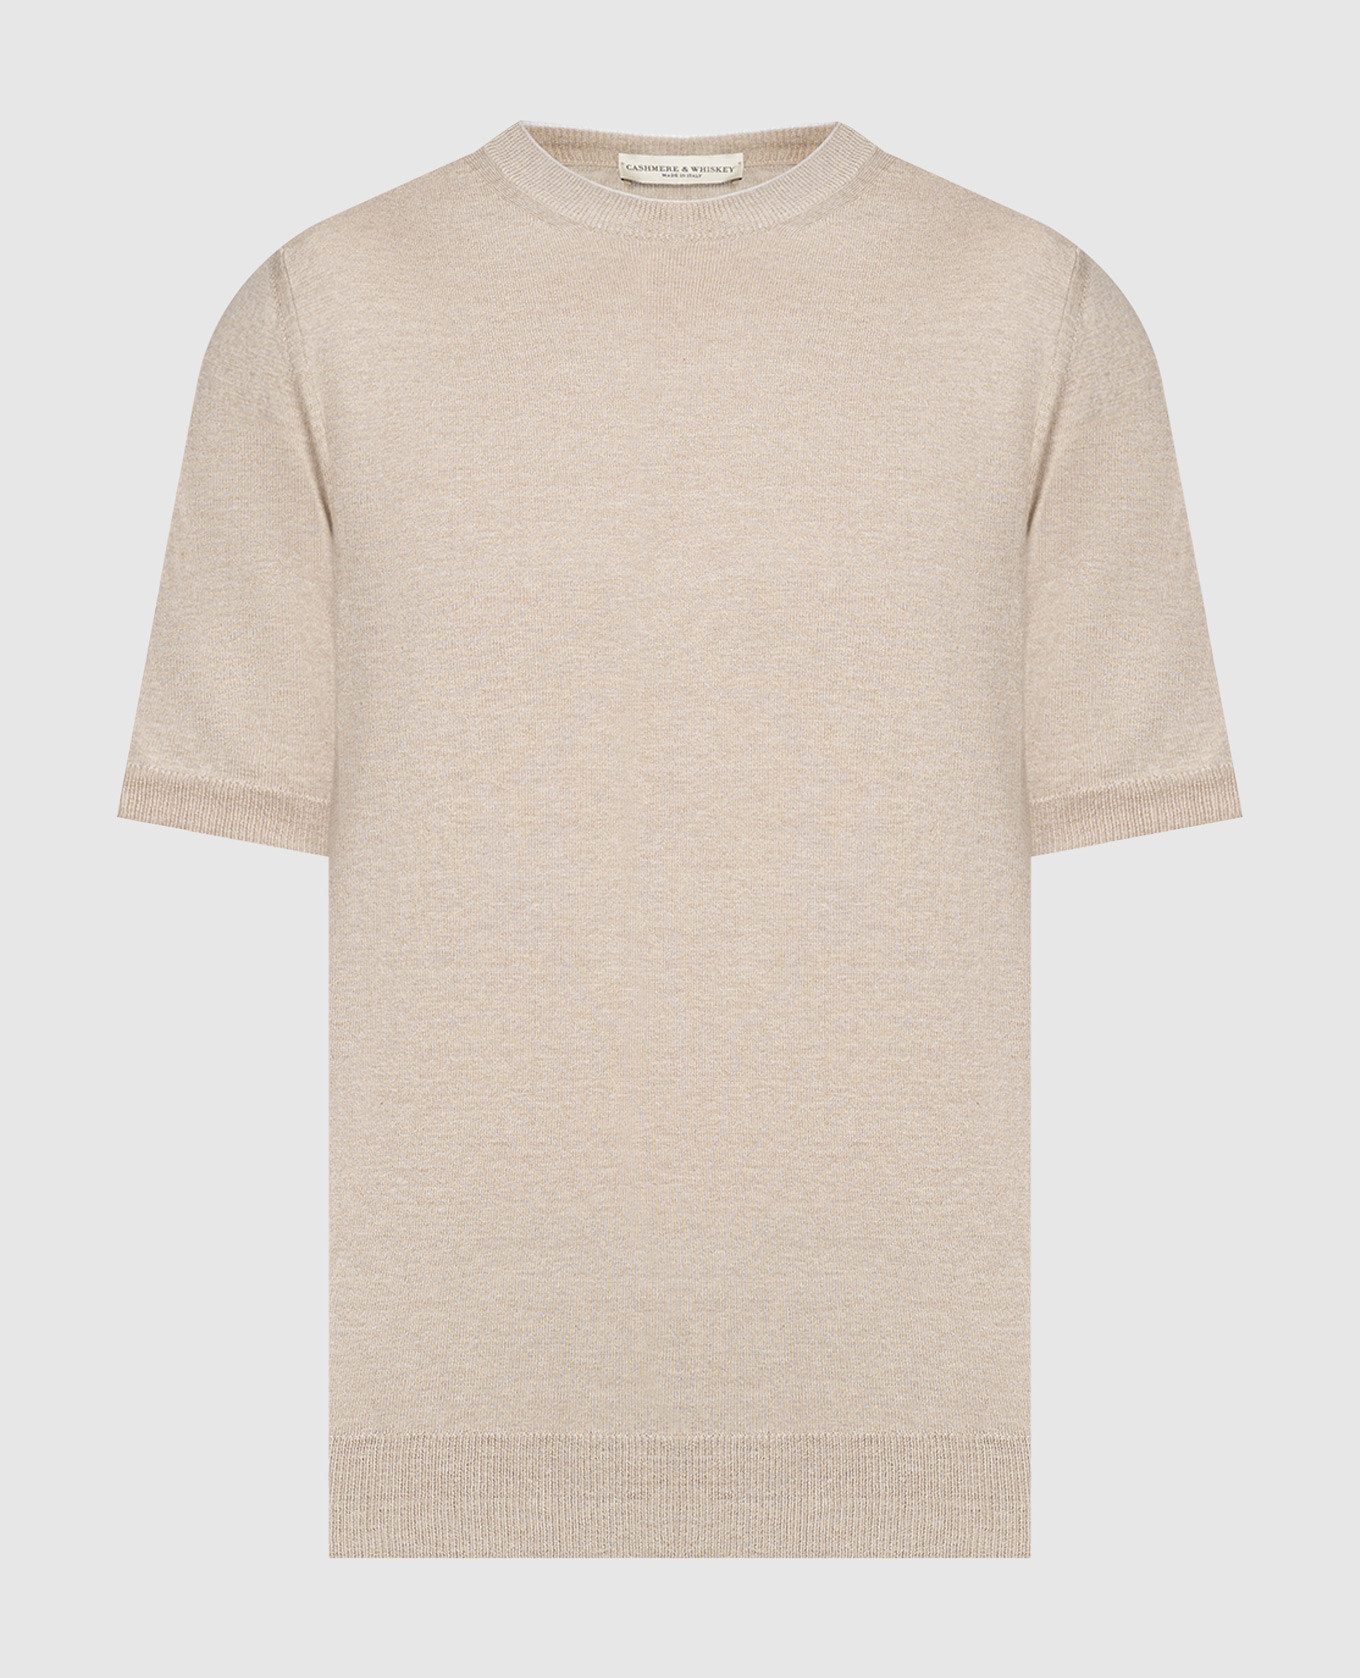 Beige t-shirt with linen and cashmere